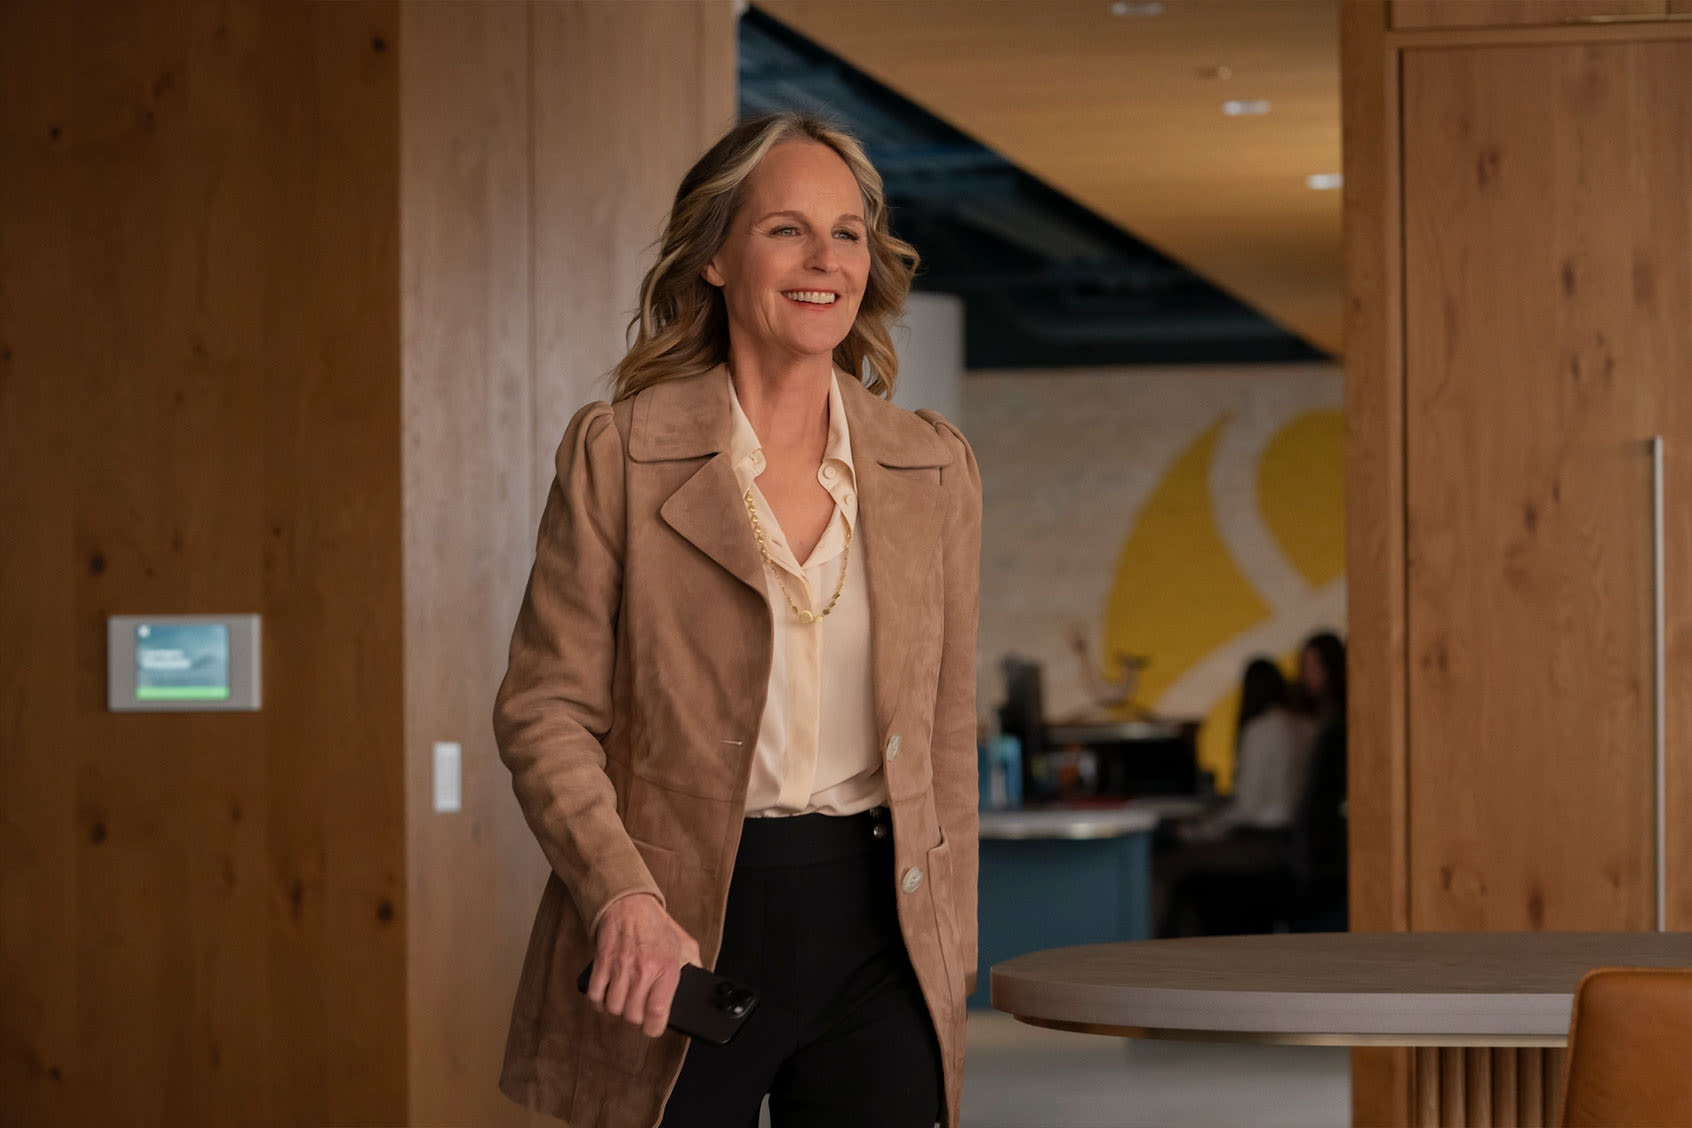 "She's suffering no fools": "Hacks" guest star Helen Hunt weighs in on the finale's shark attack